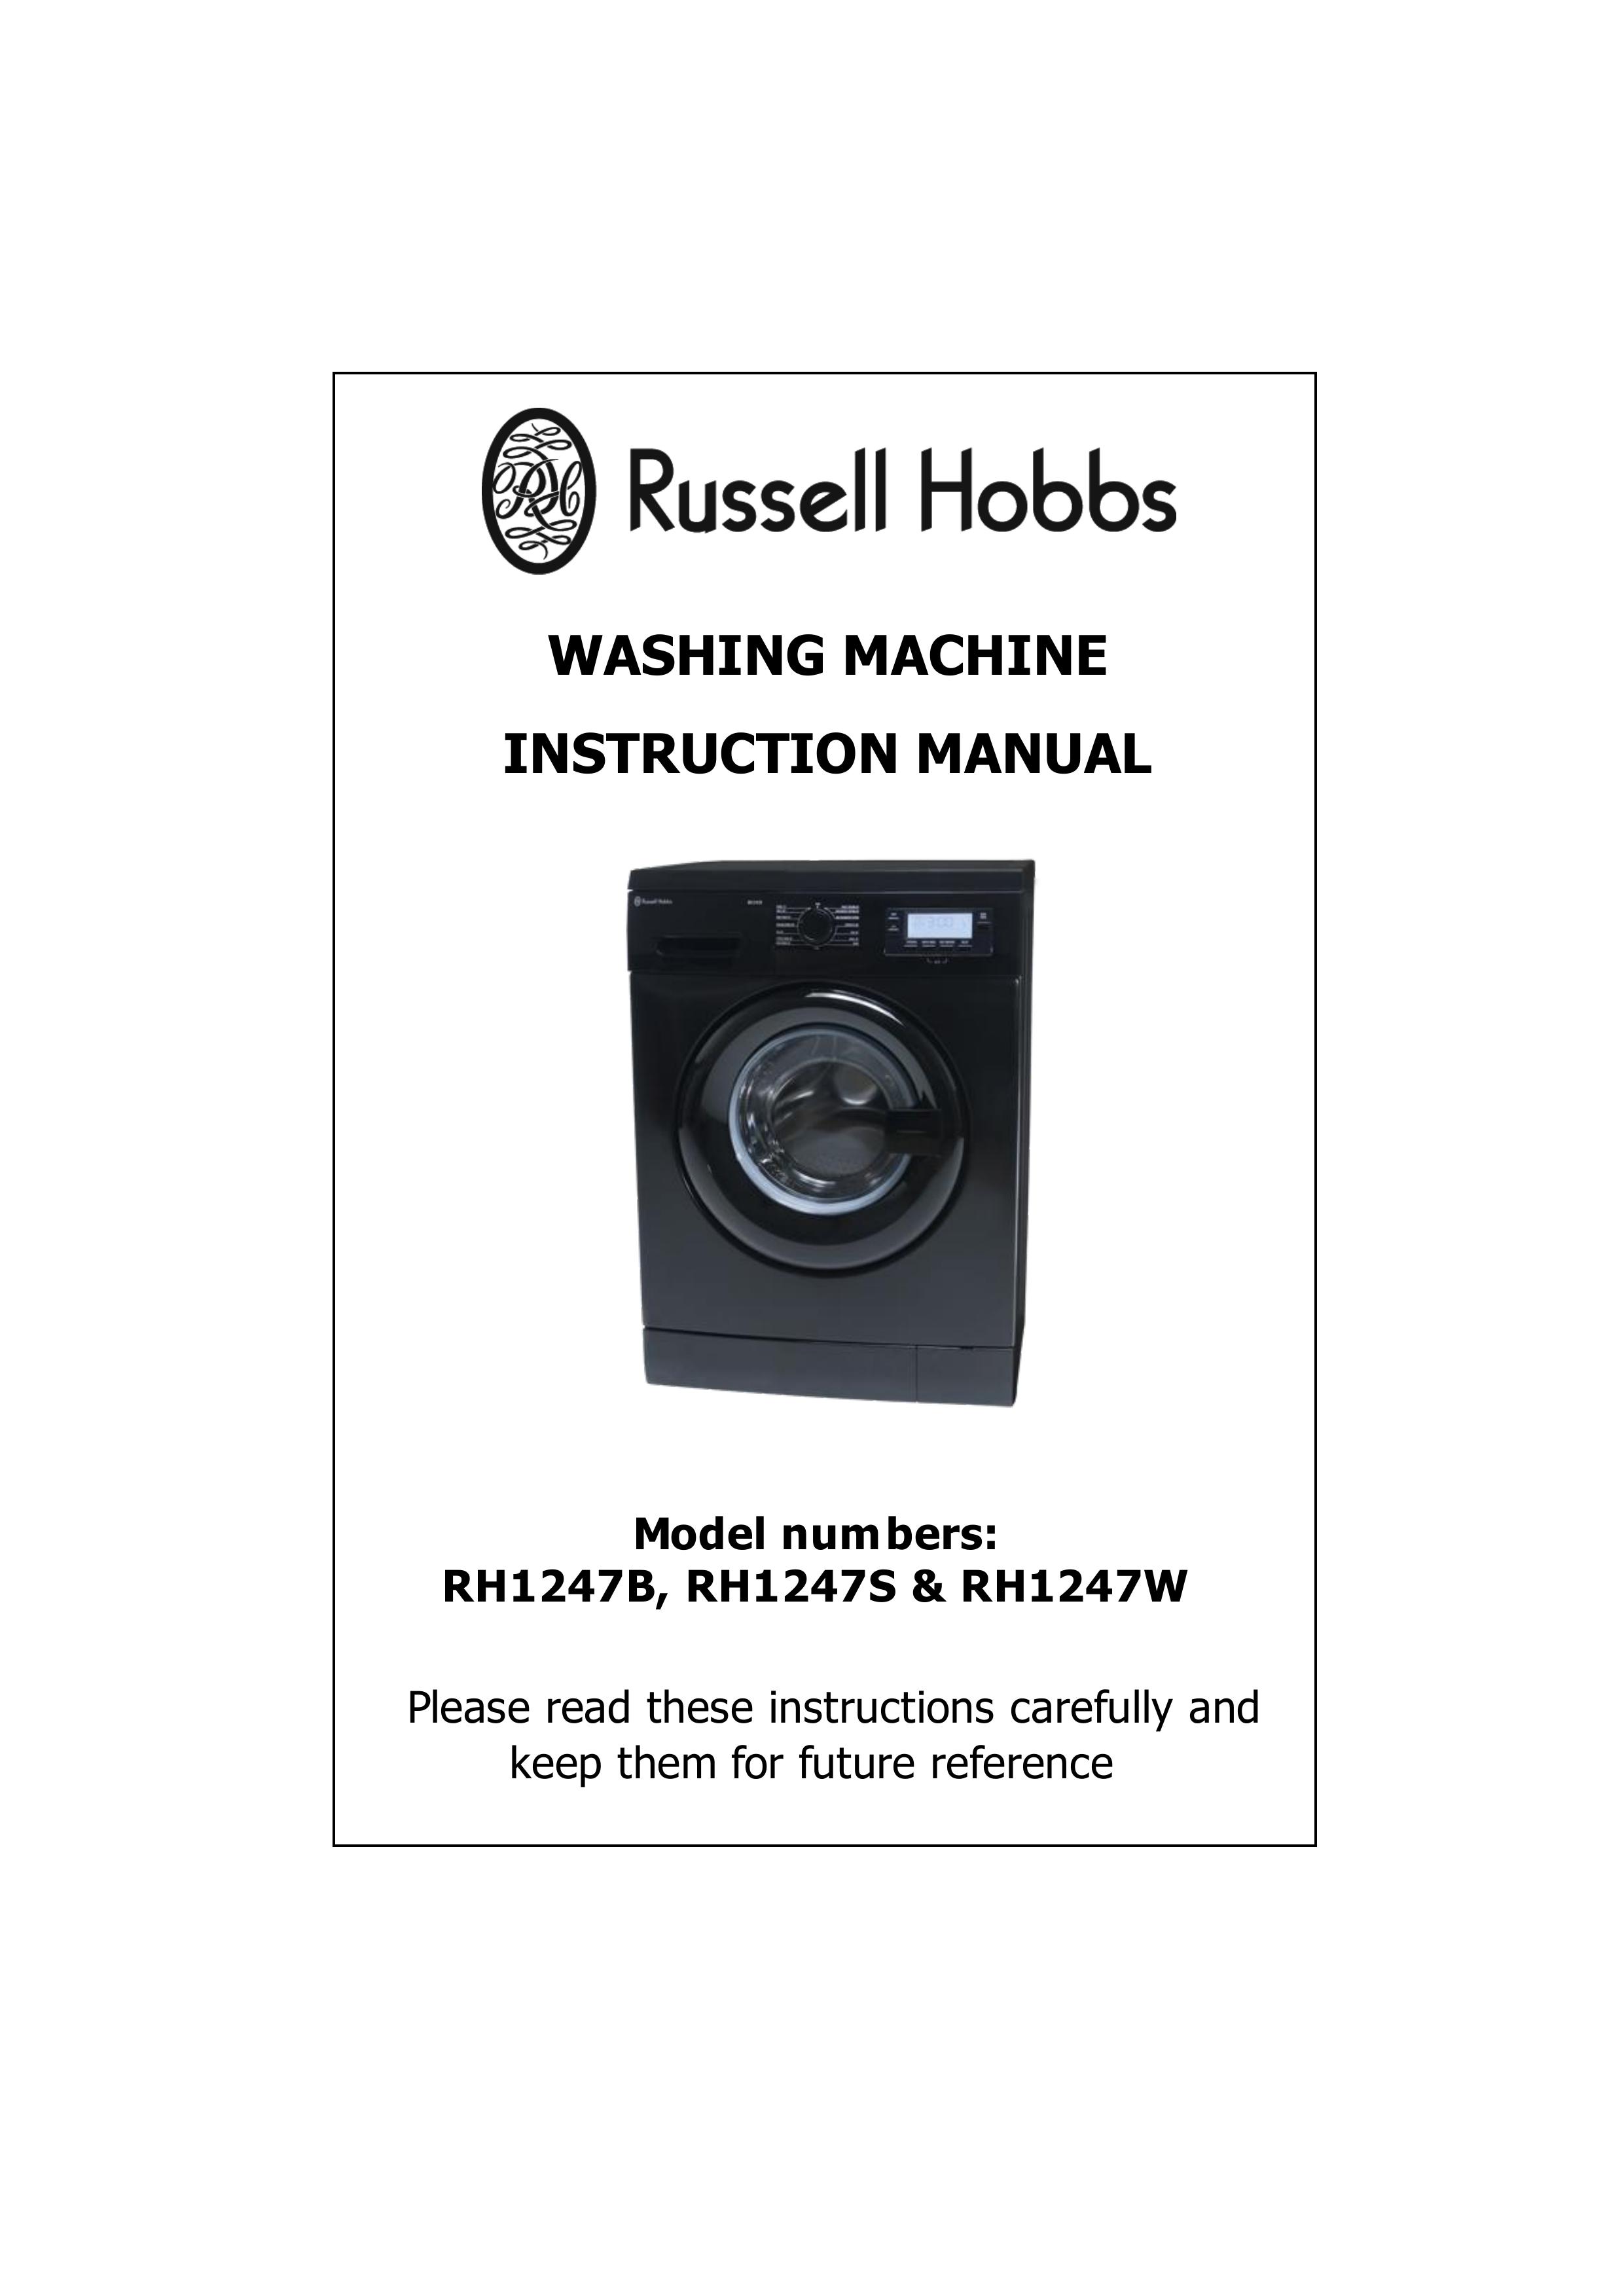 Russell Hobbs RH1247S Washer User Manual